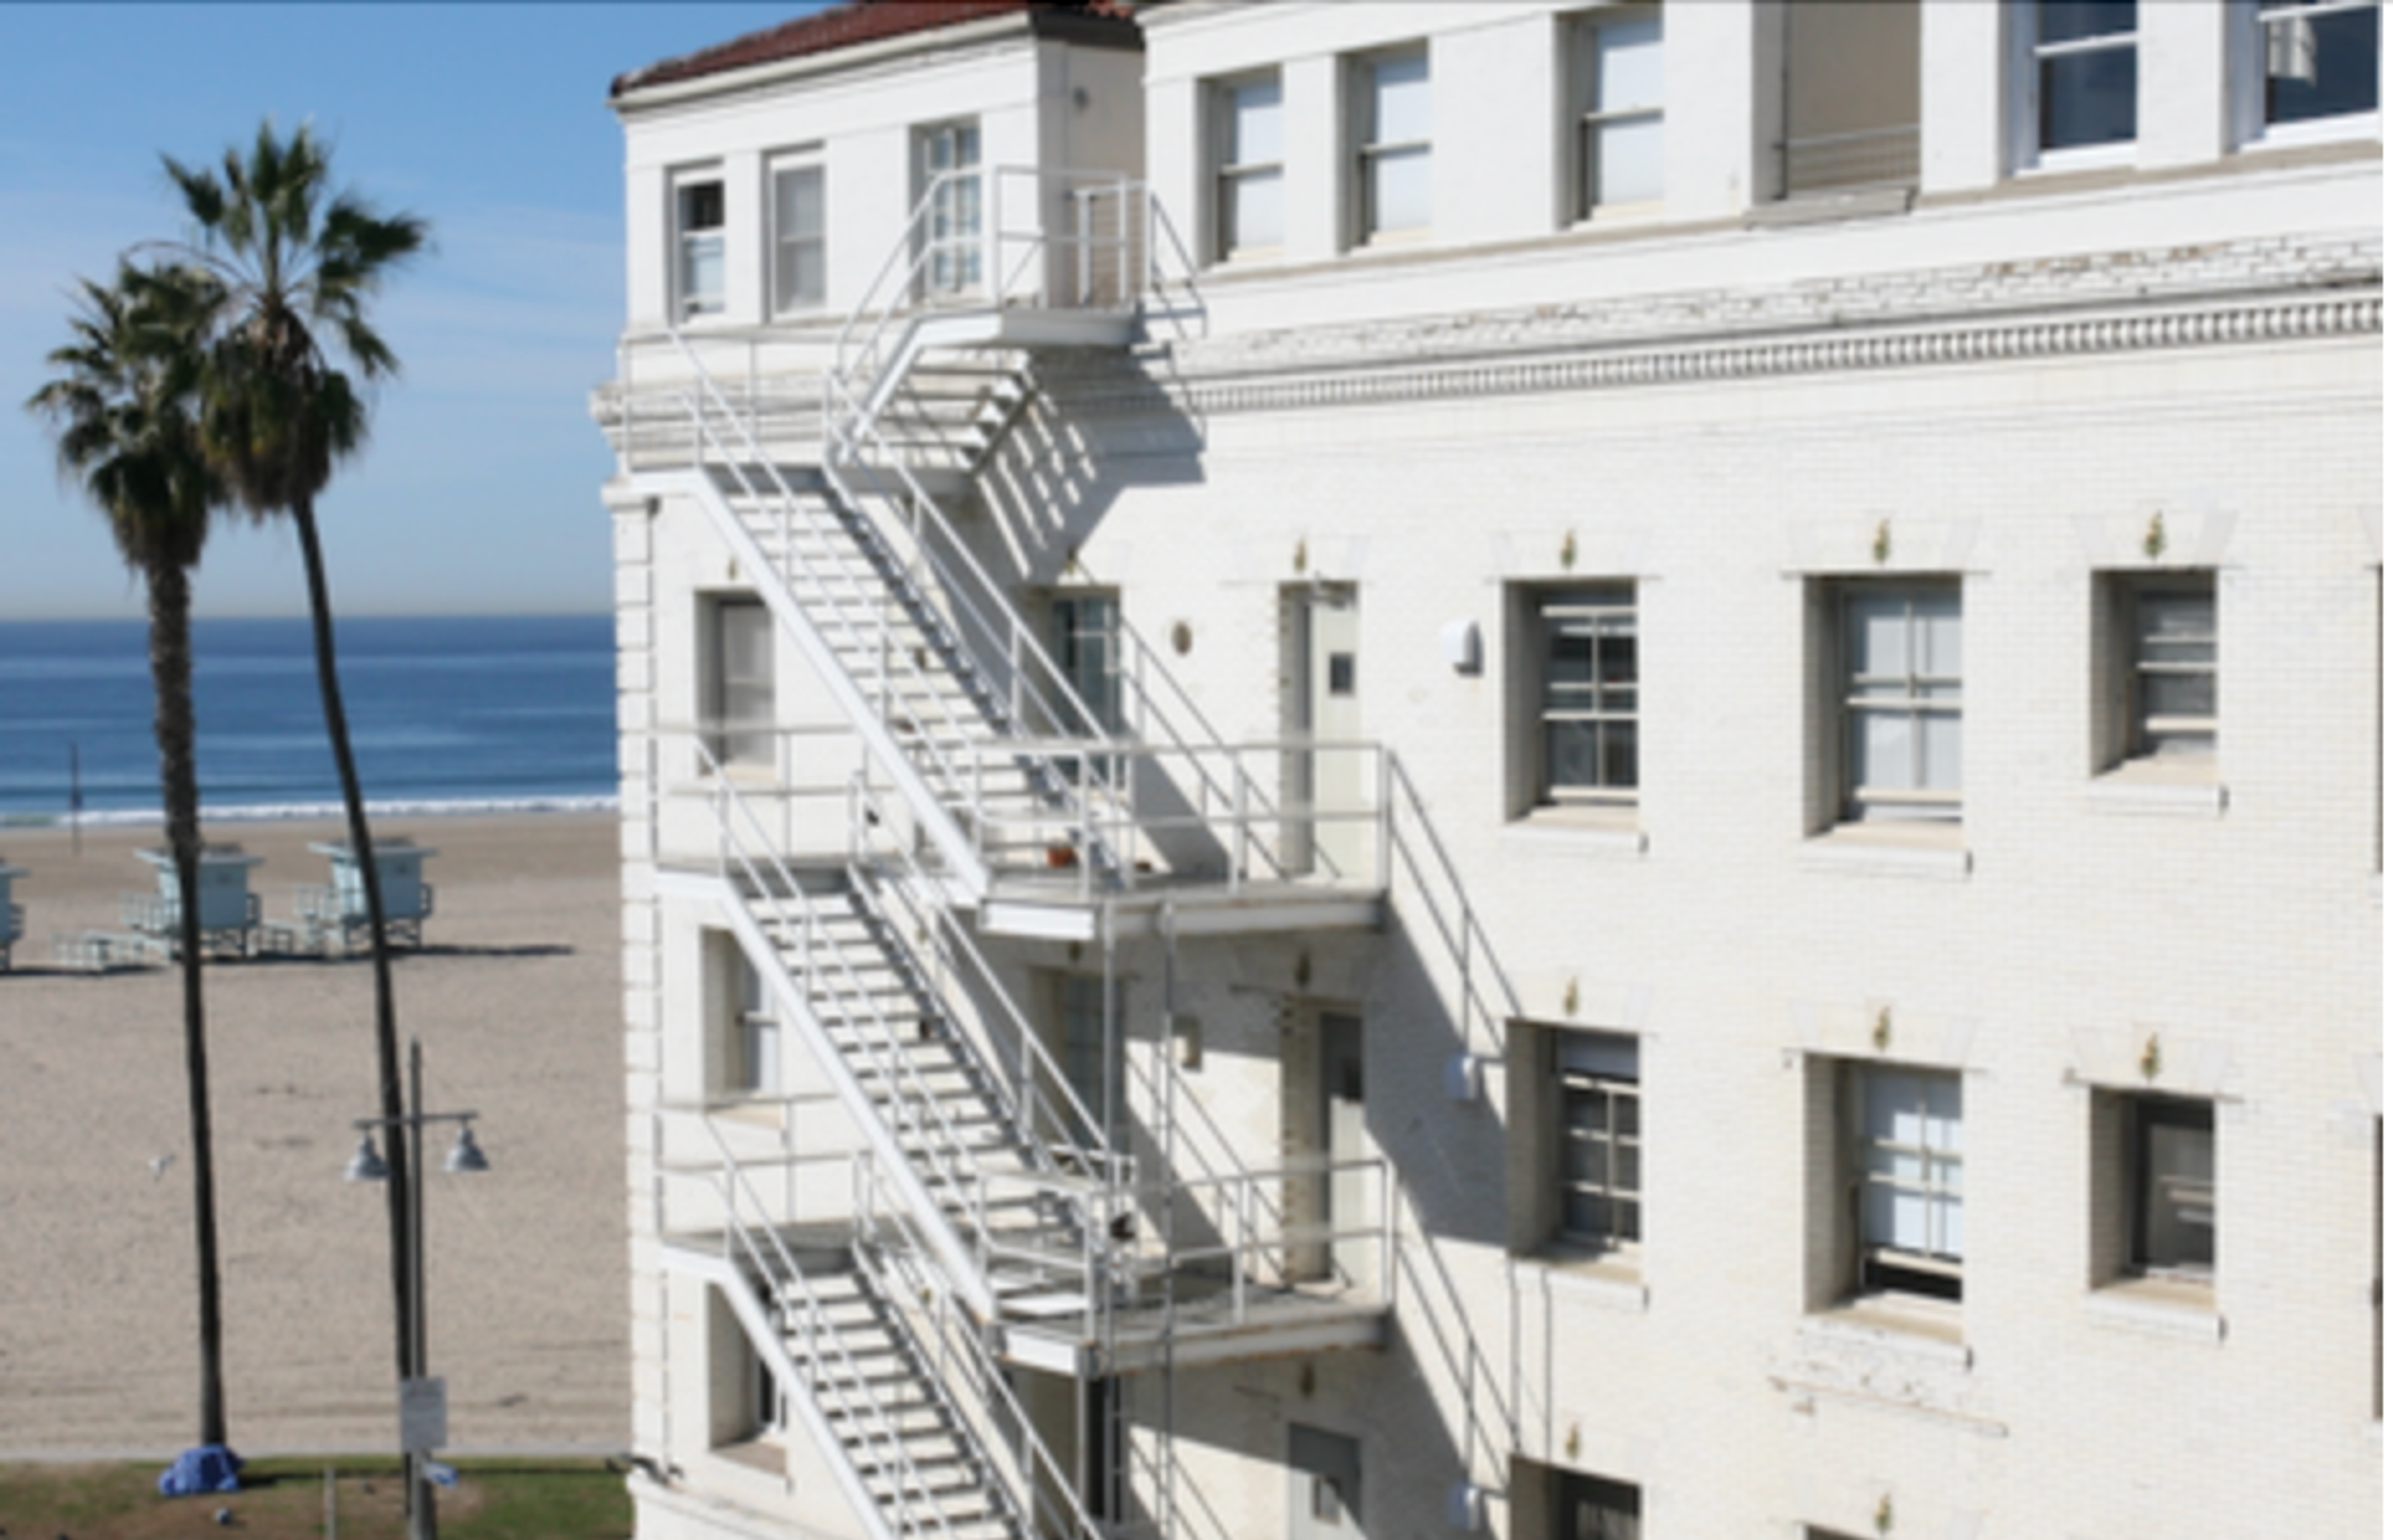 Side view of the former Waldorf Hotel, an early 20th century white building, with a fire escape. Venice Beach is in the background.